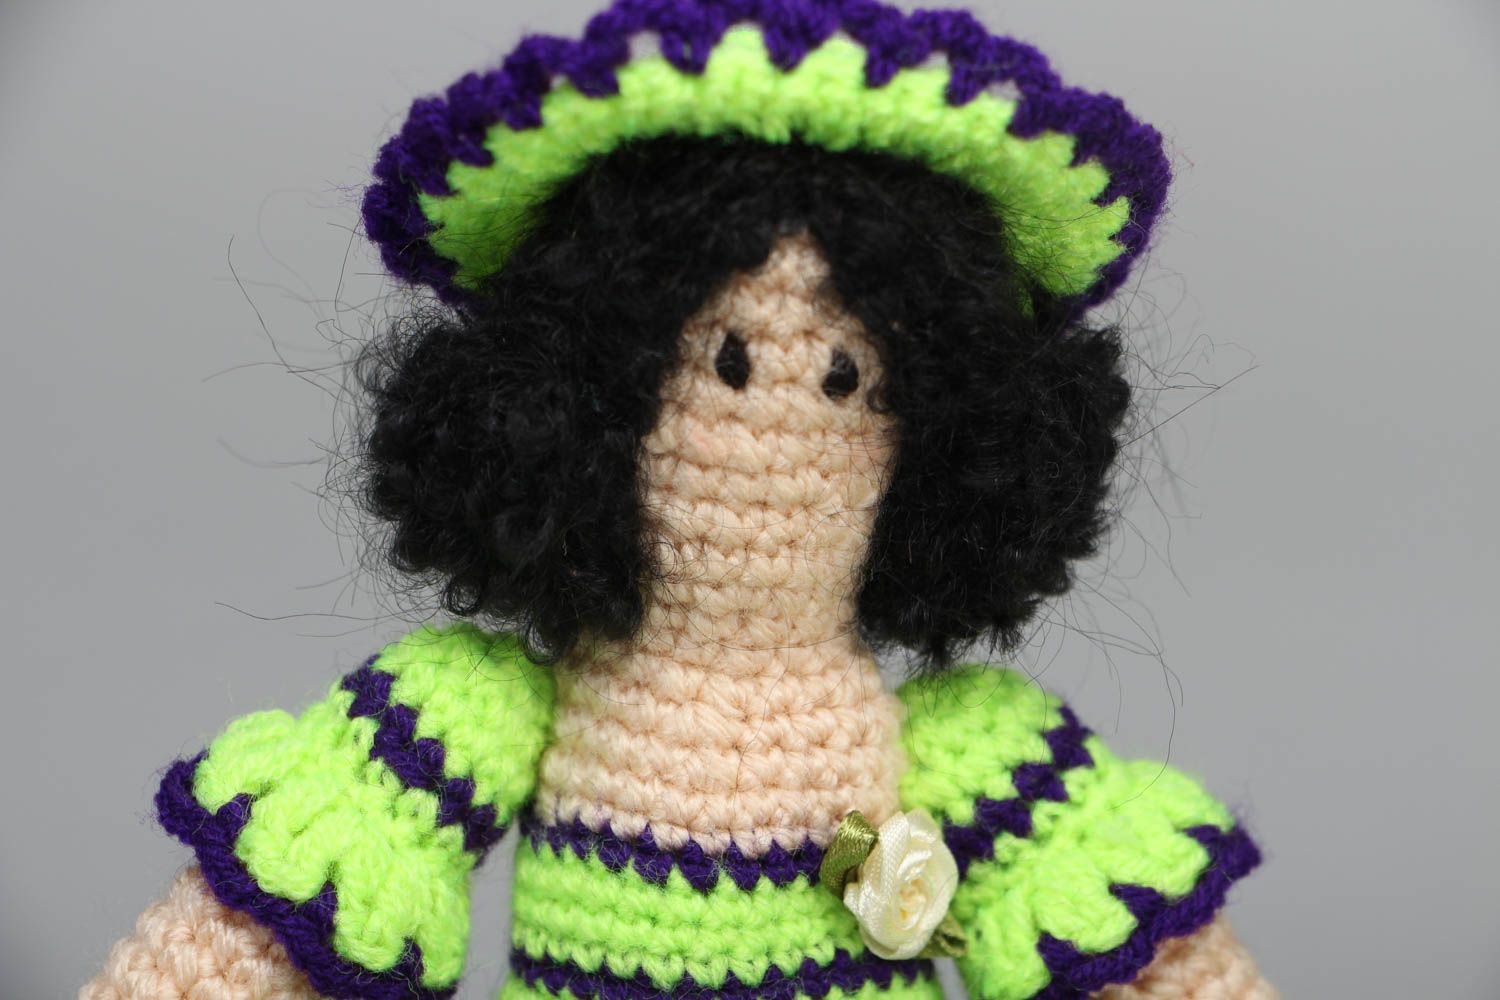 Soft crochet toy Lady with Hat photo 2